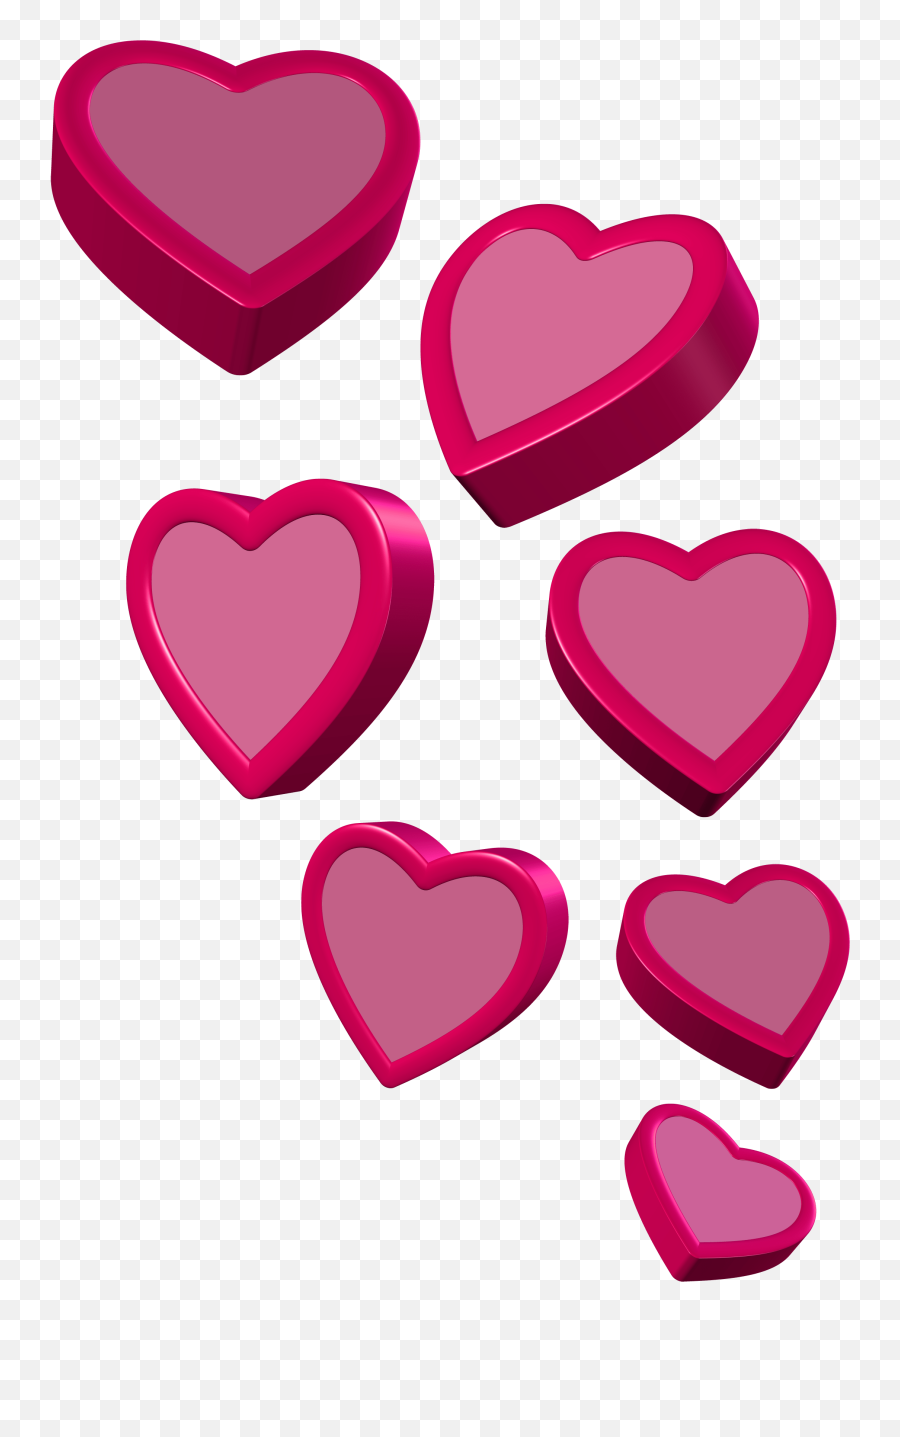 Love Hearts Png Pink Clipart - Full Size Clipart 811852 7 Hearts Clipart Emoji,Heart With Sparkles Emoji